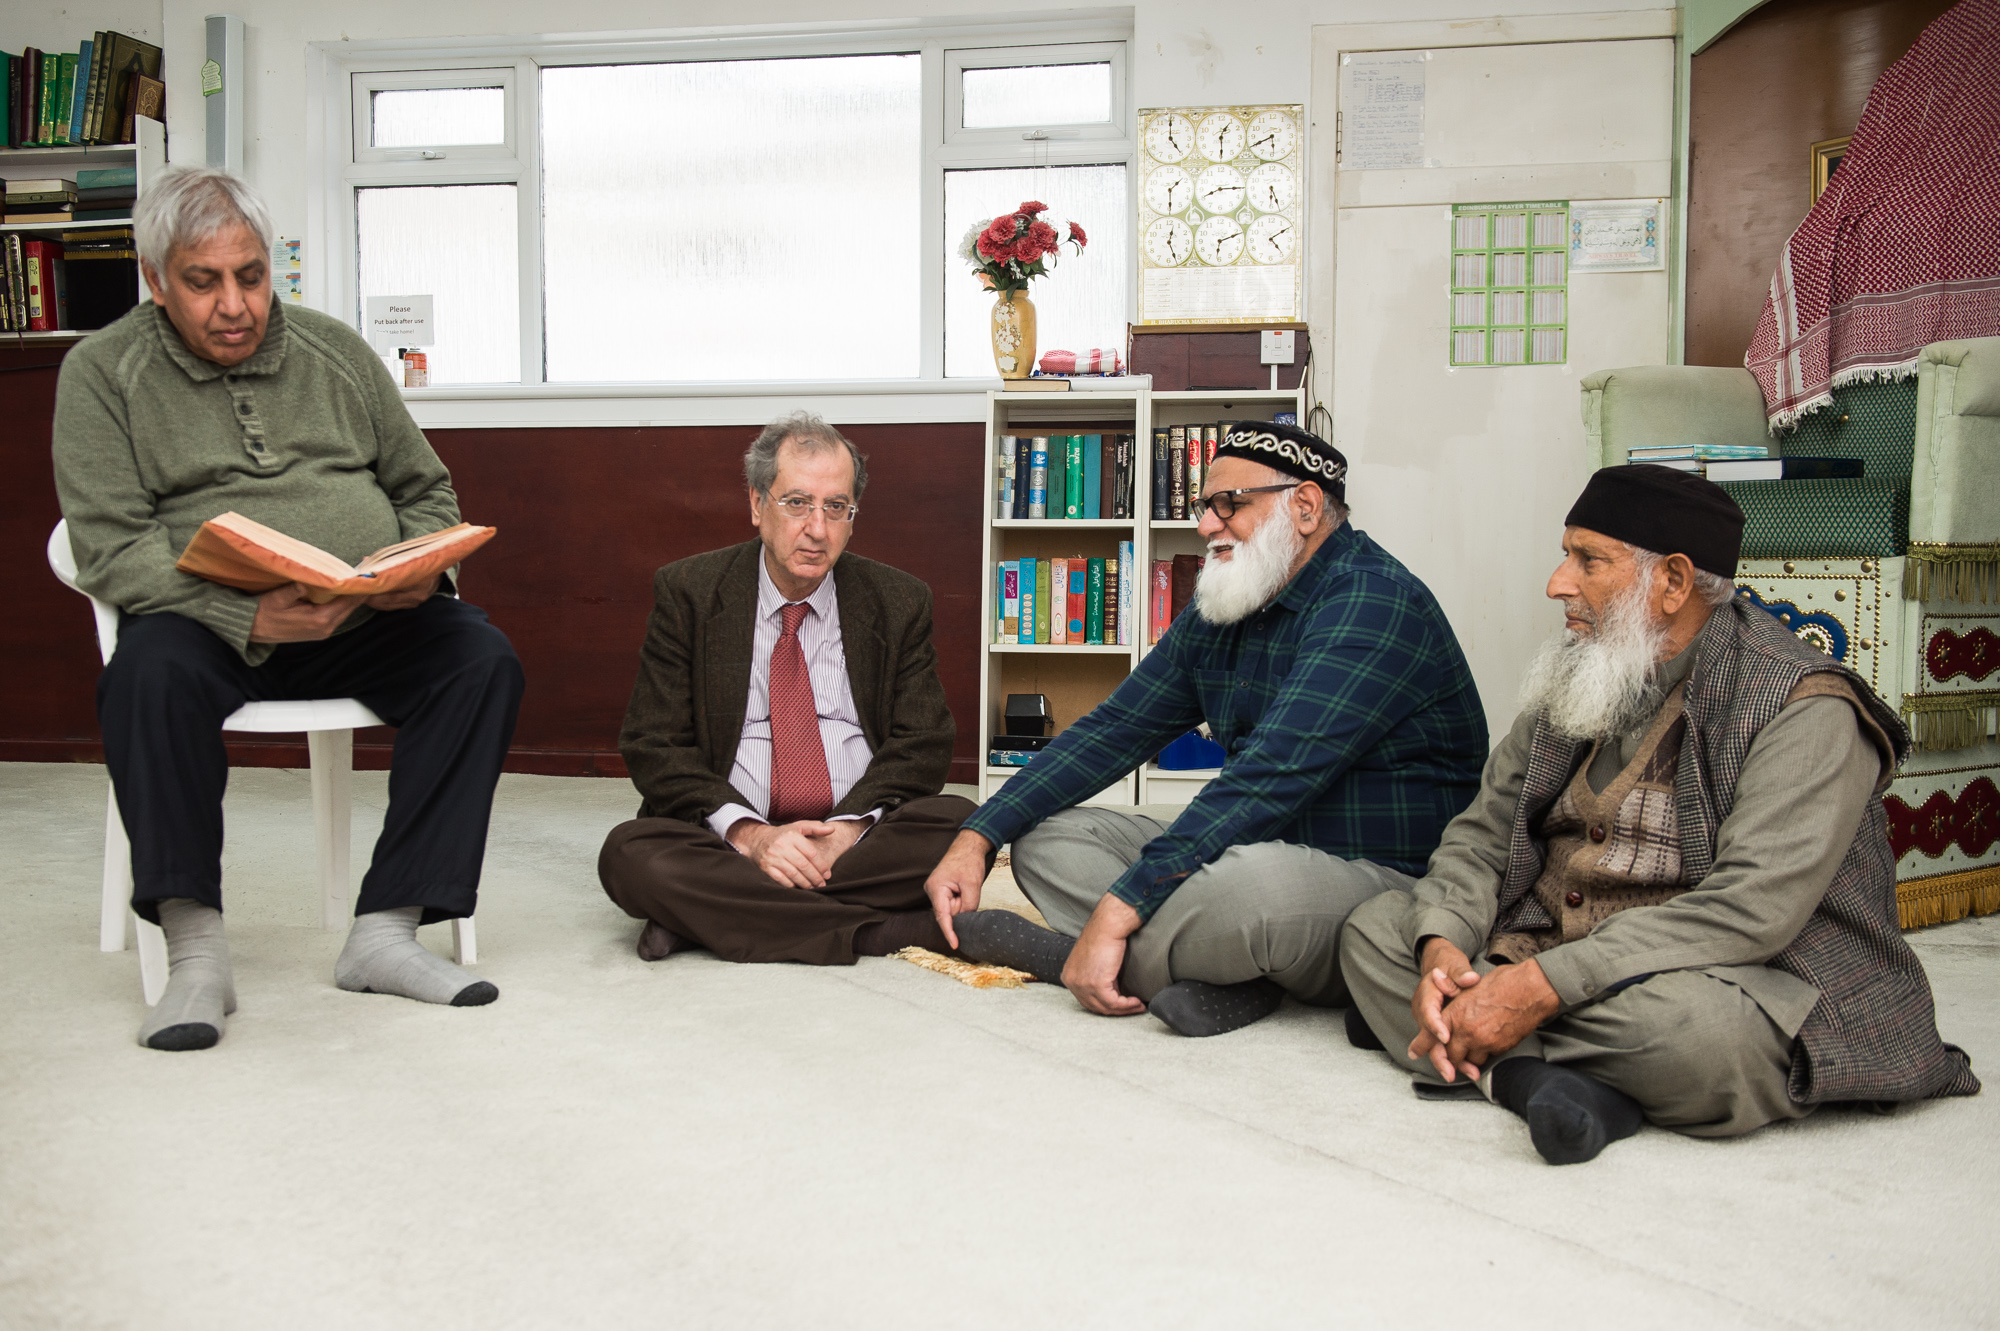 Members of the Kirkcaldy Muslim Centre, from left: Ahmed Mian, Dr Bashier Oudeh, Faqir Mohammad and Iftkhar Sajid.